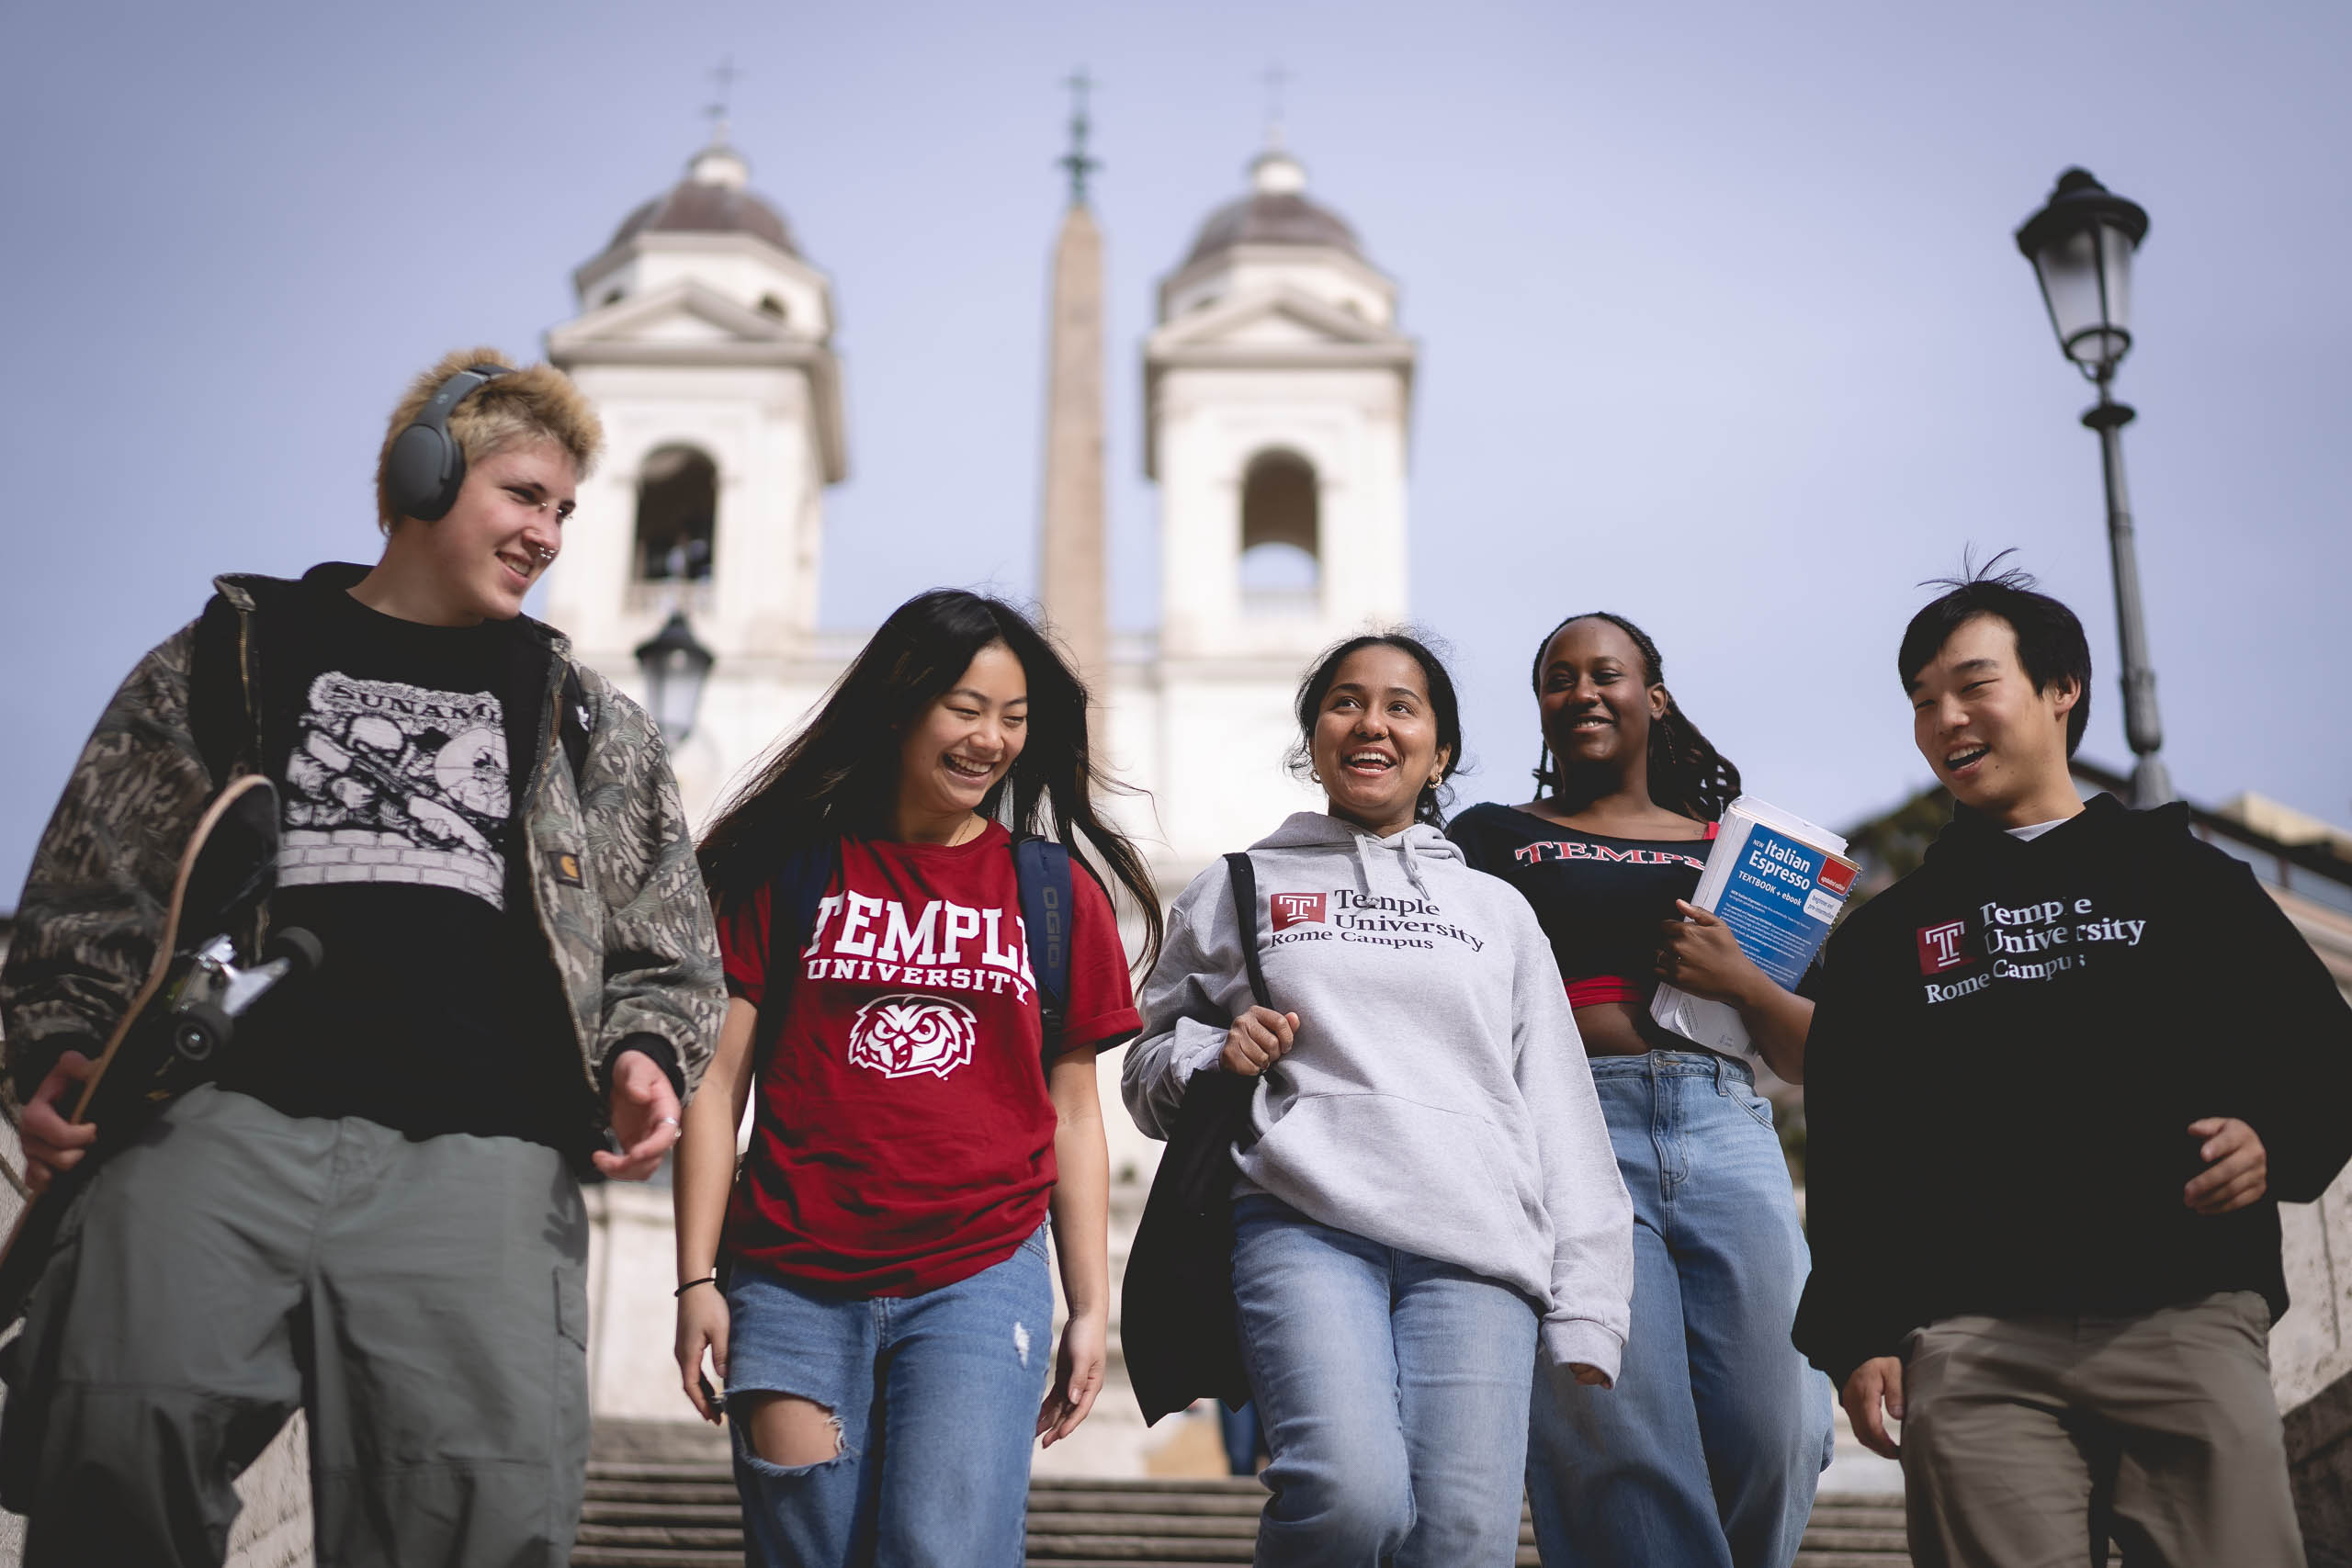 Students at Temple Rome's new location